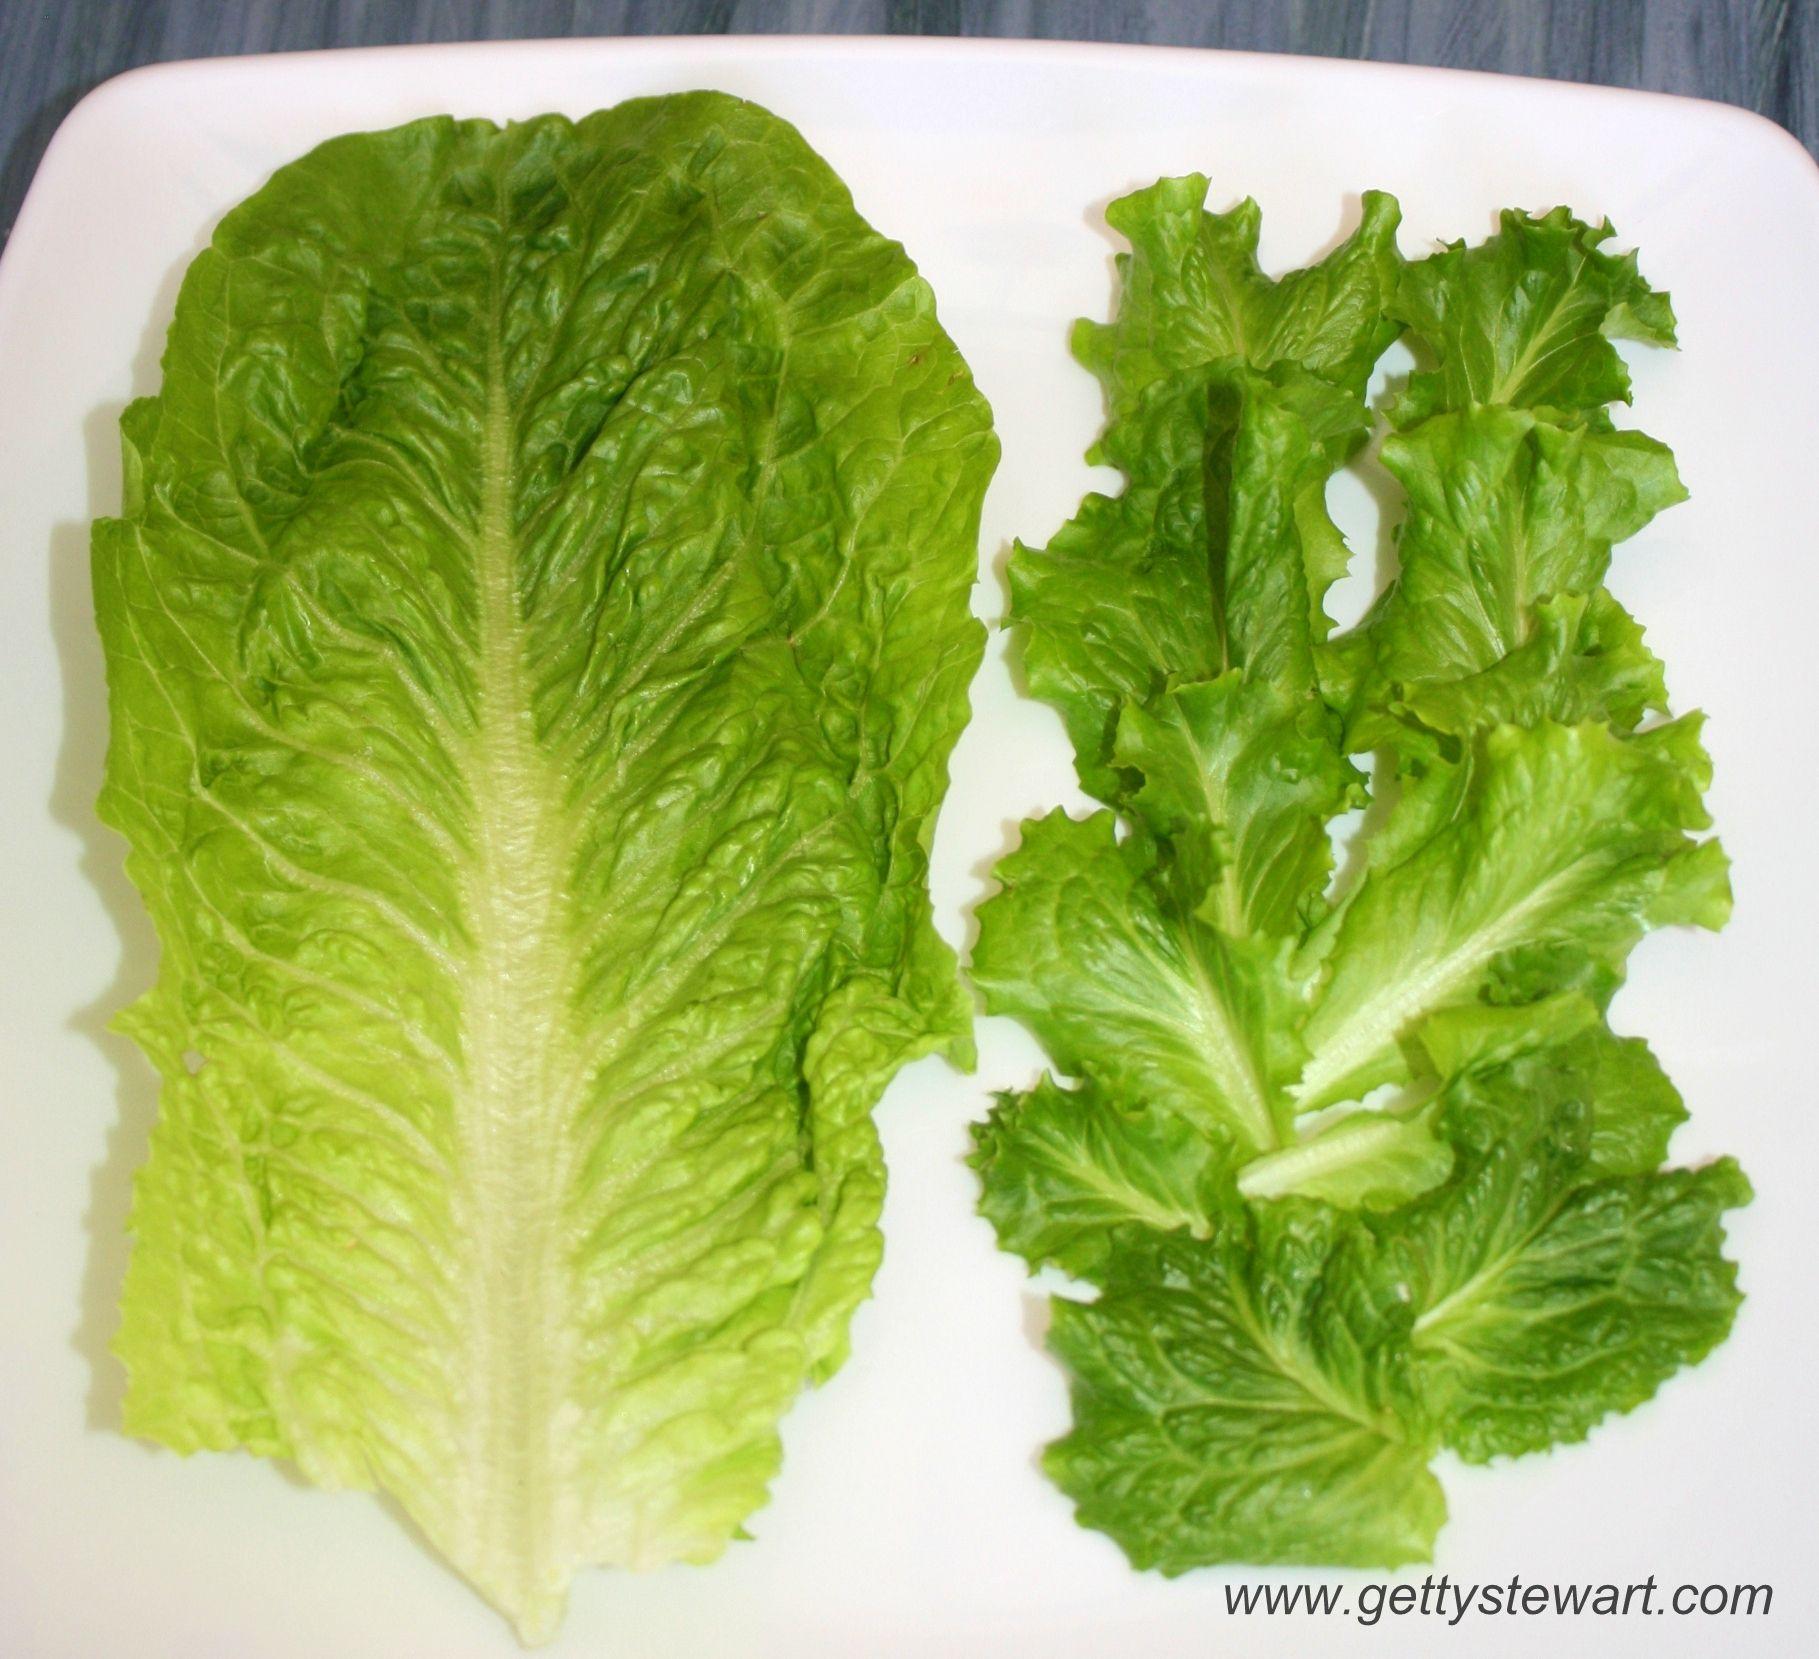 Lettuce Leaf Logo - How to Regrow Romaine Lettuce from the Stem